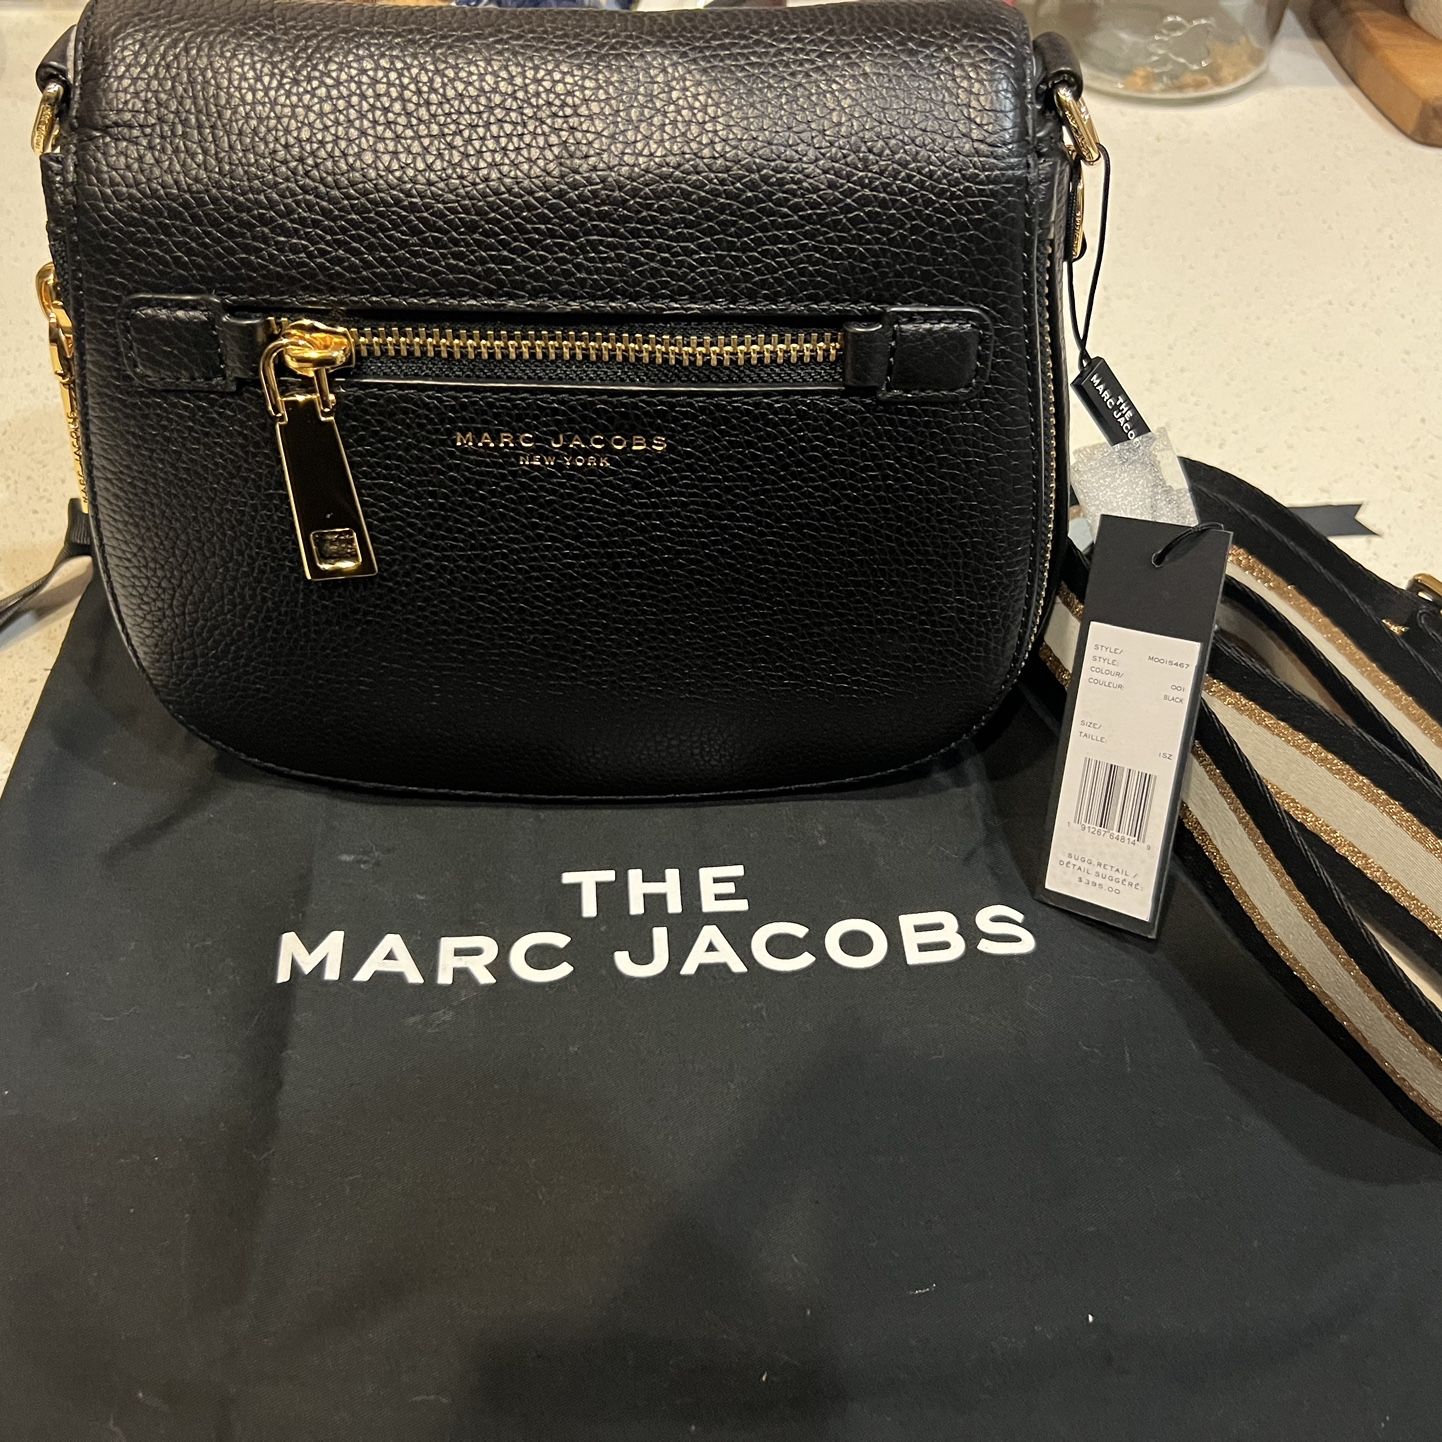 Marc Jacobs Black Purse for Sale in Aliso Viejo, CA - OfferUp